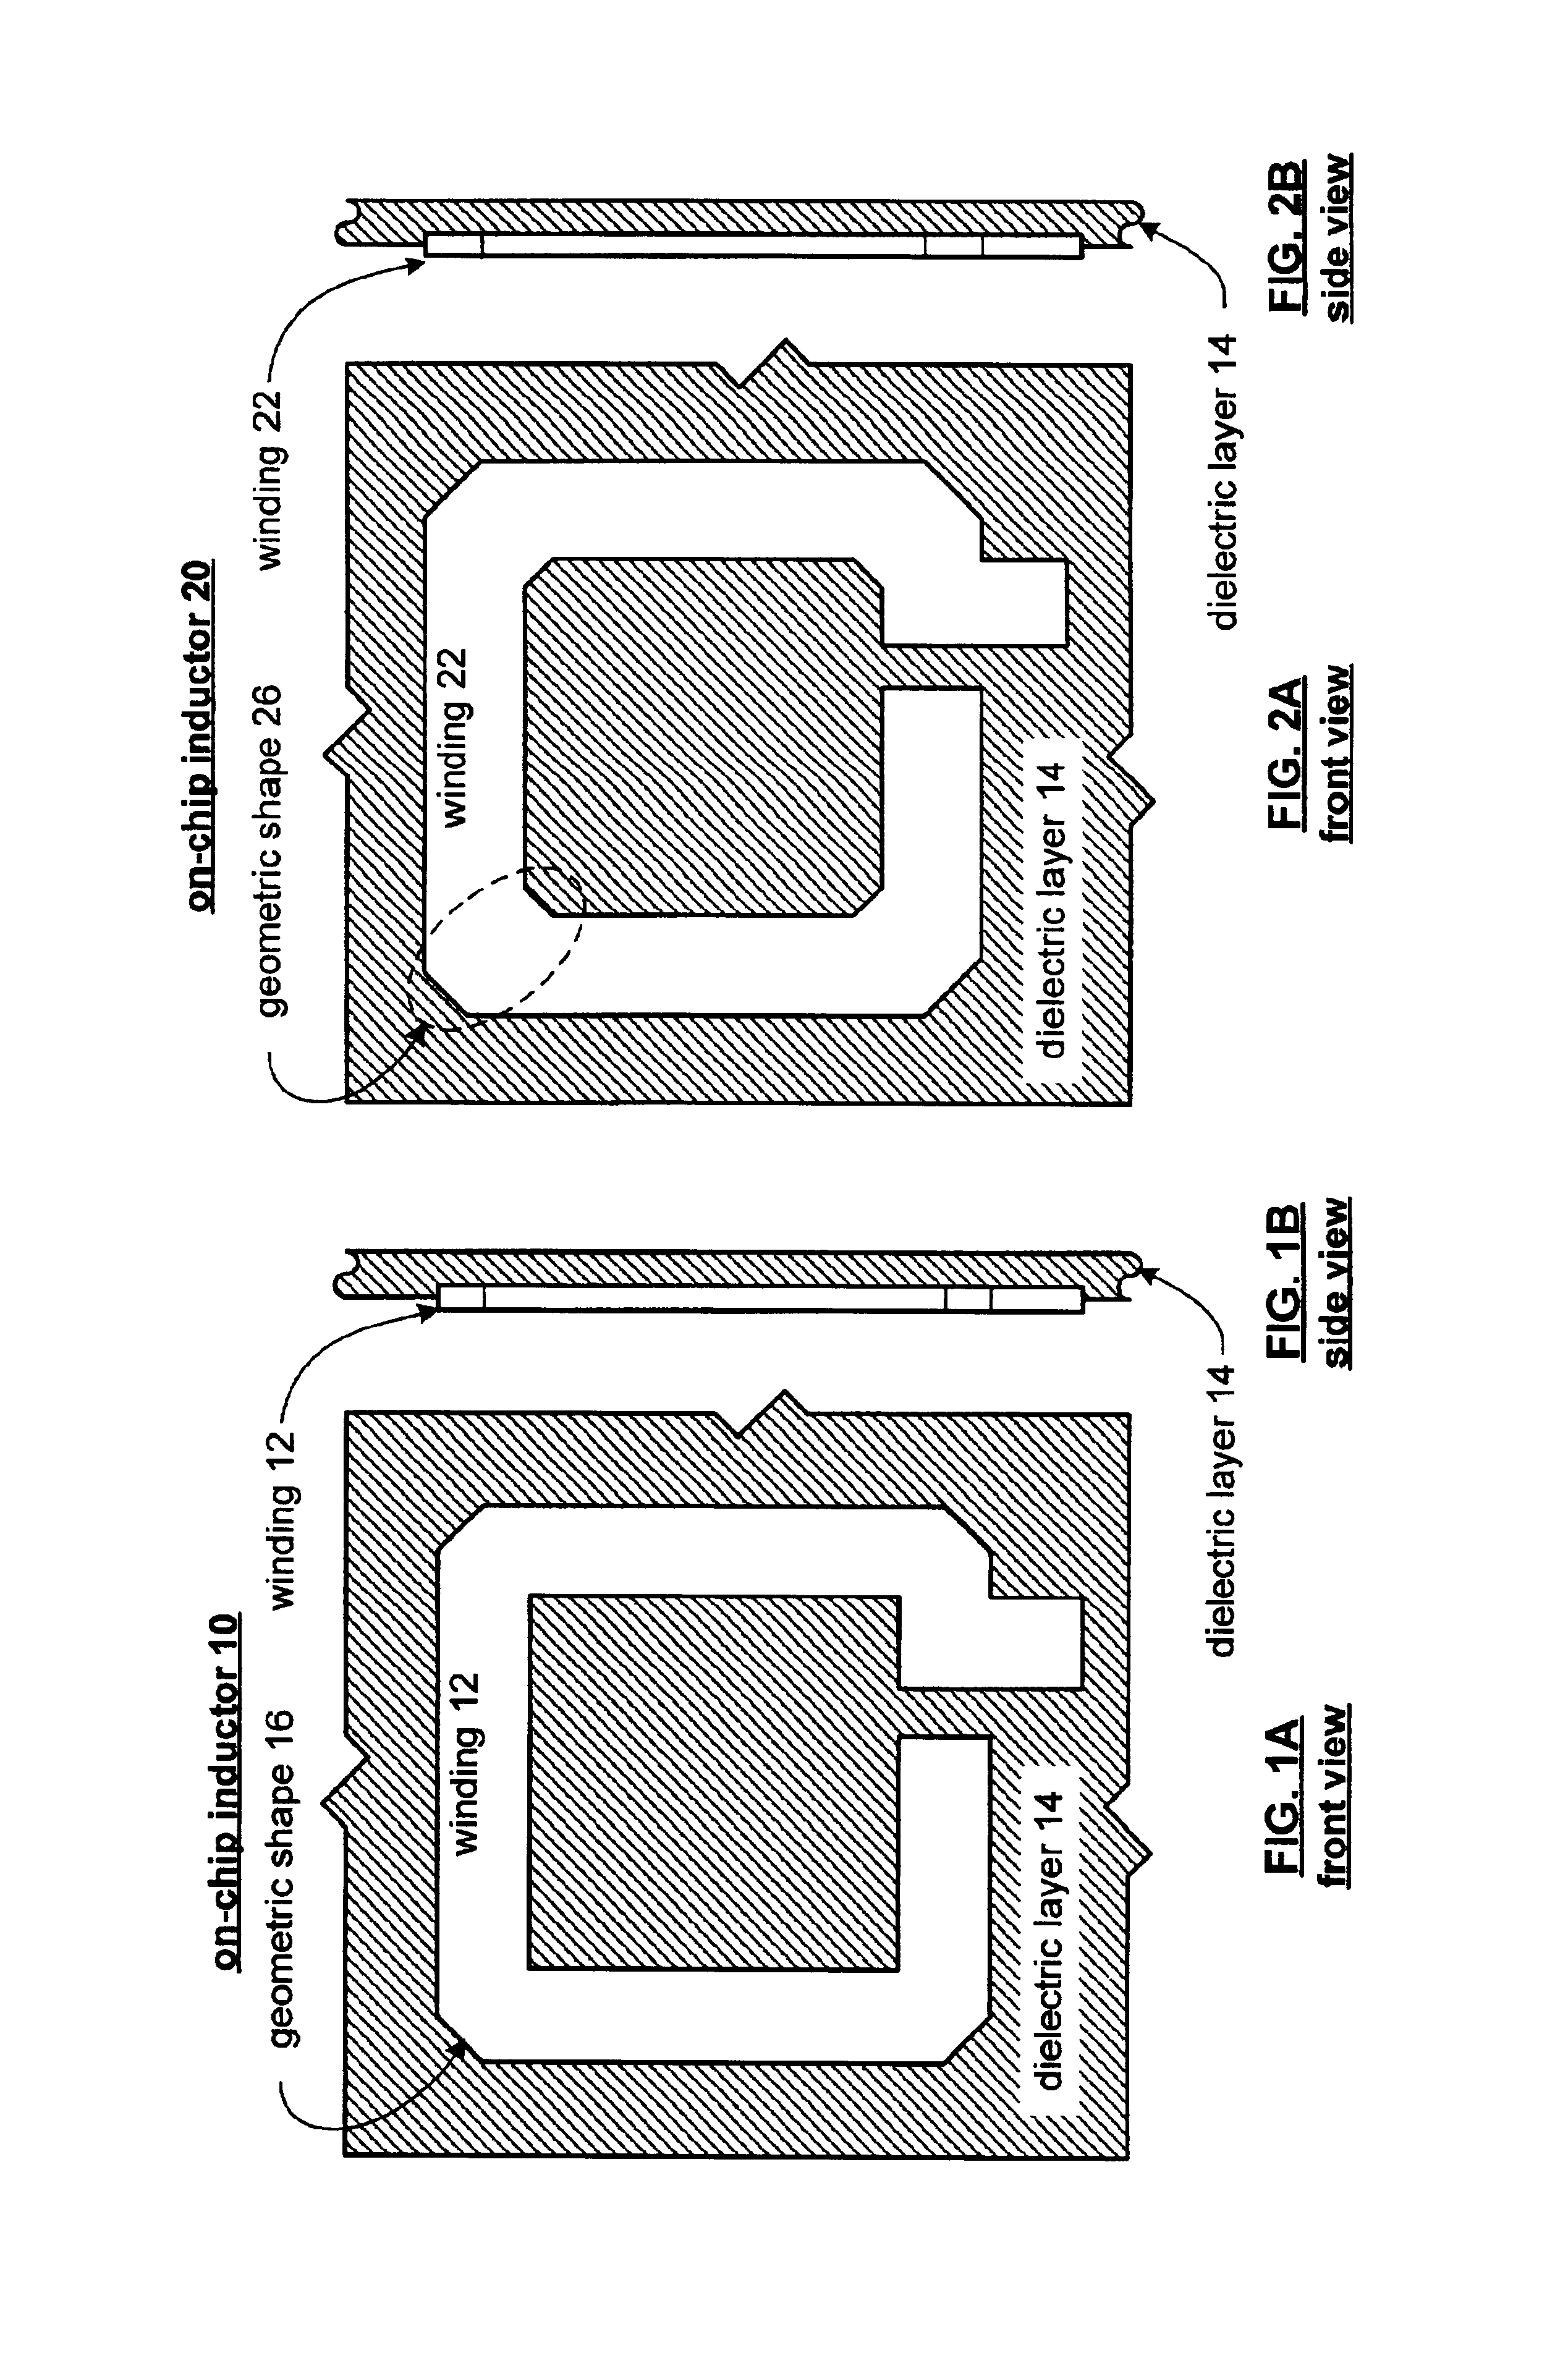 On-chip inductor having a square geometry and high Q factor and method of manufacture thereof